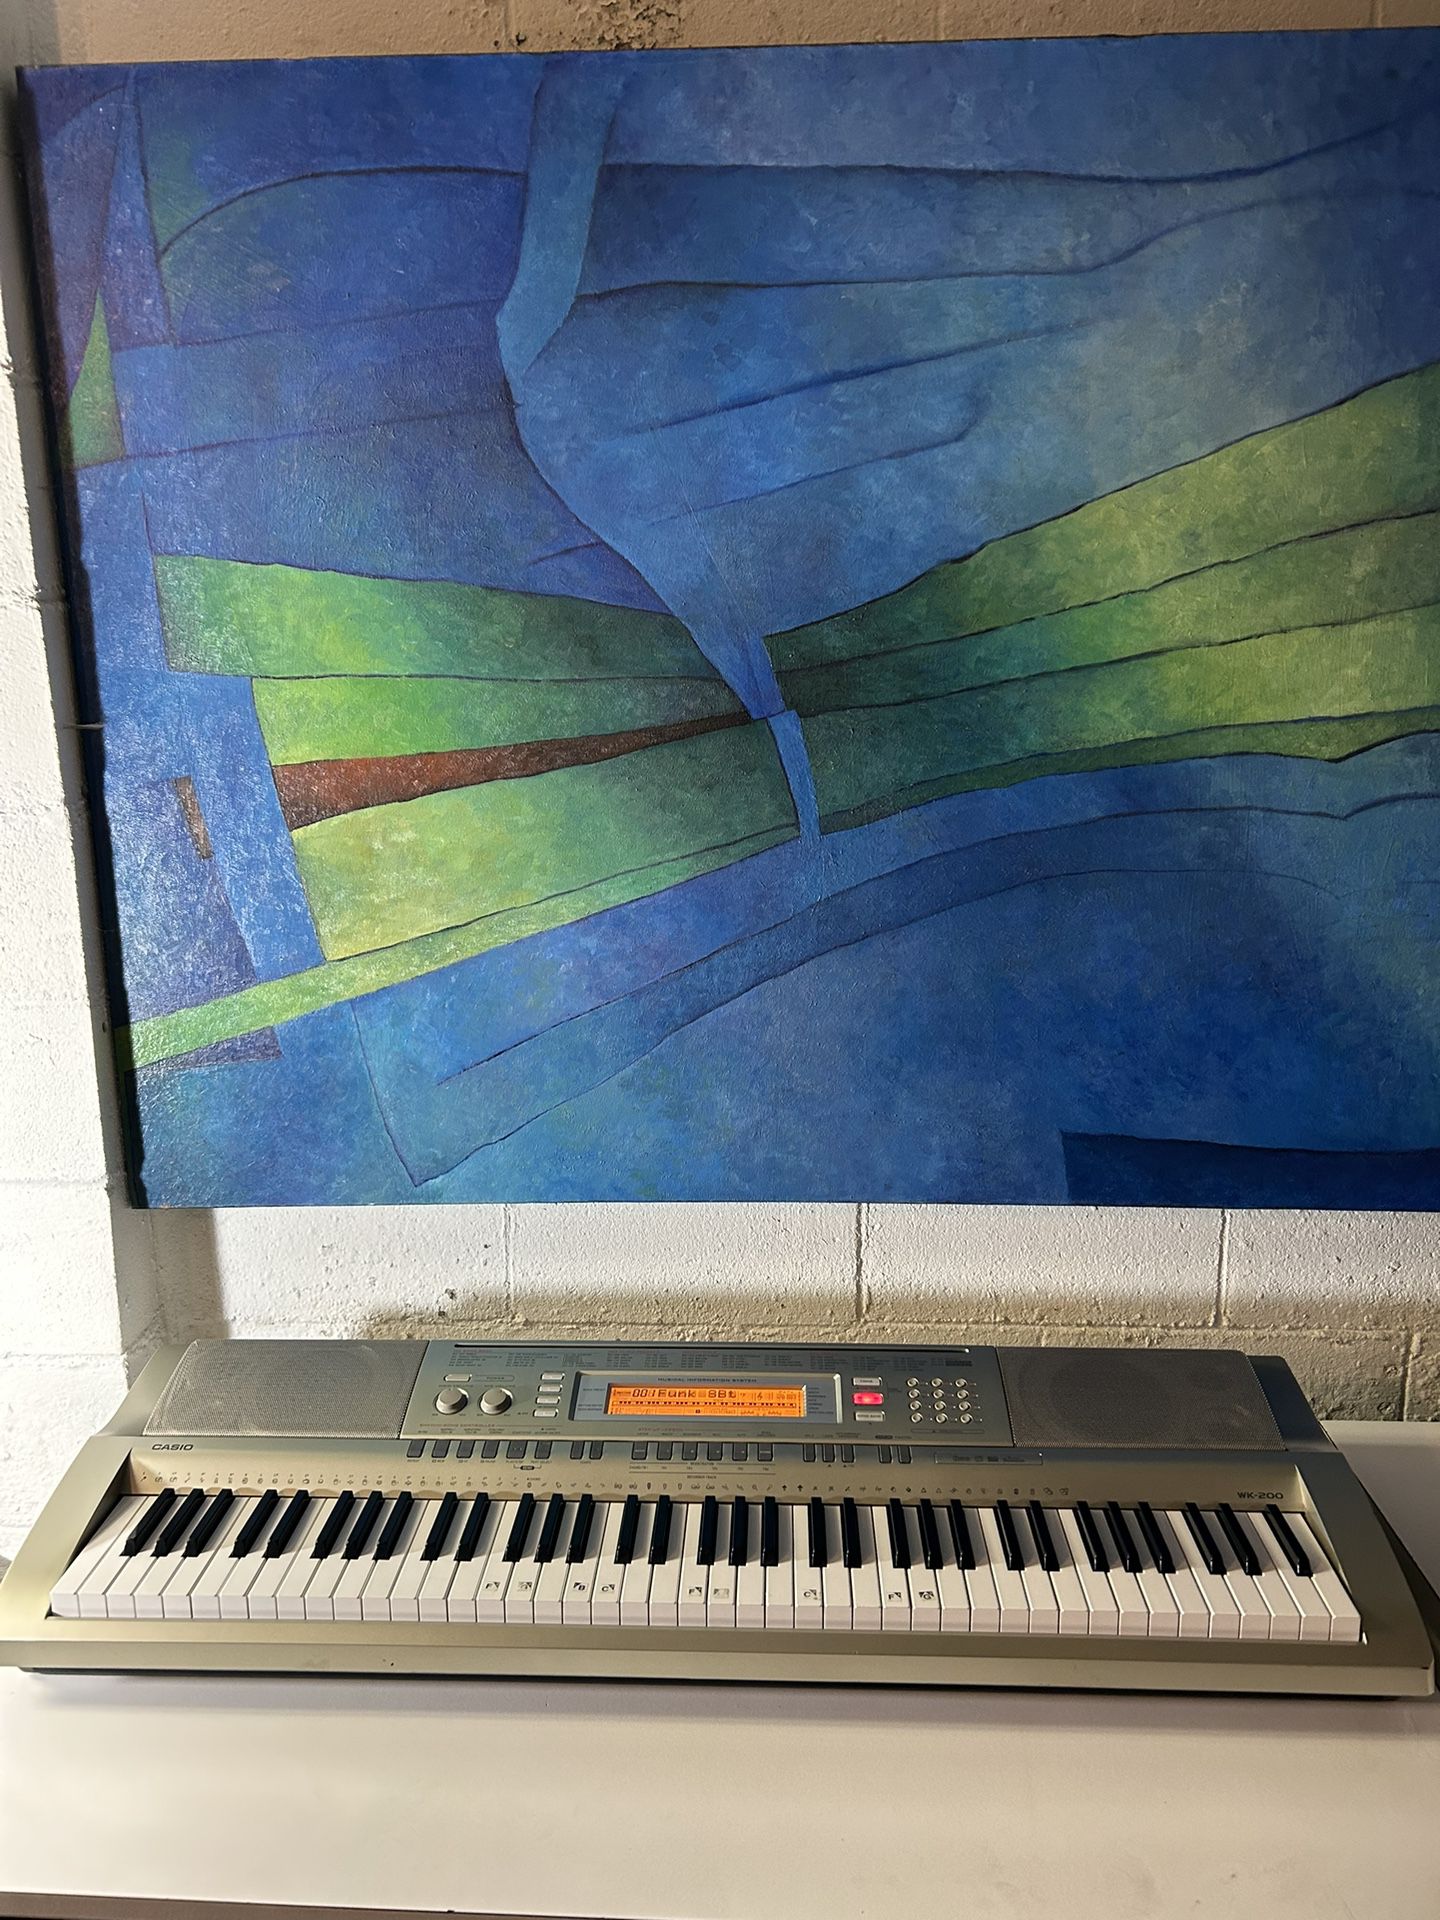 WK-200 Synthesizer Keyboard for Sale in - OfferUp